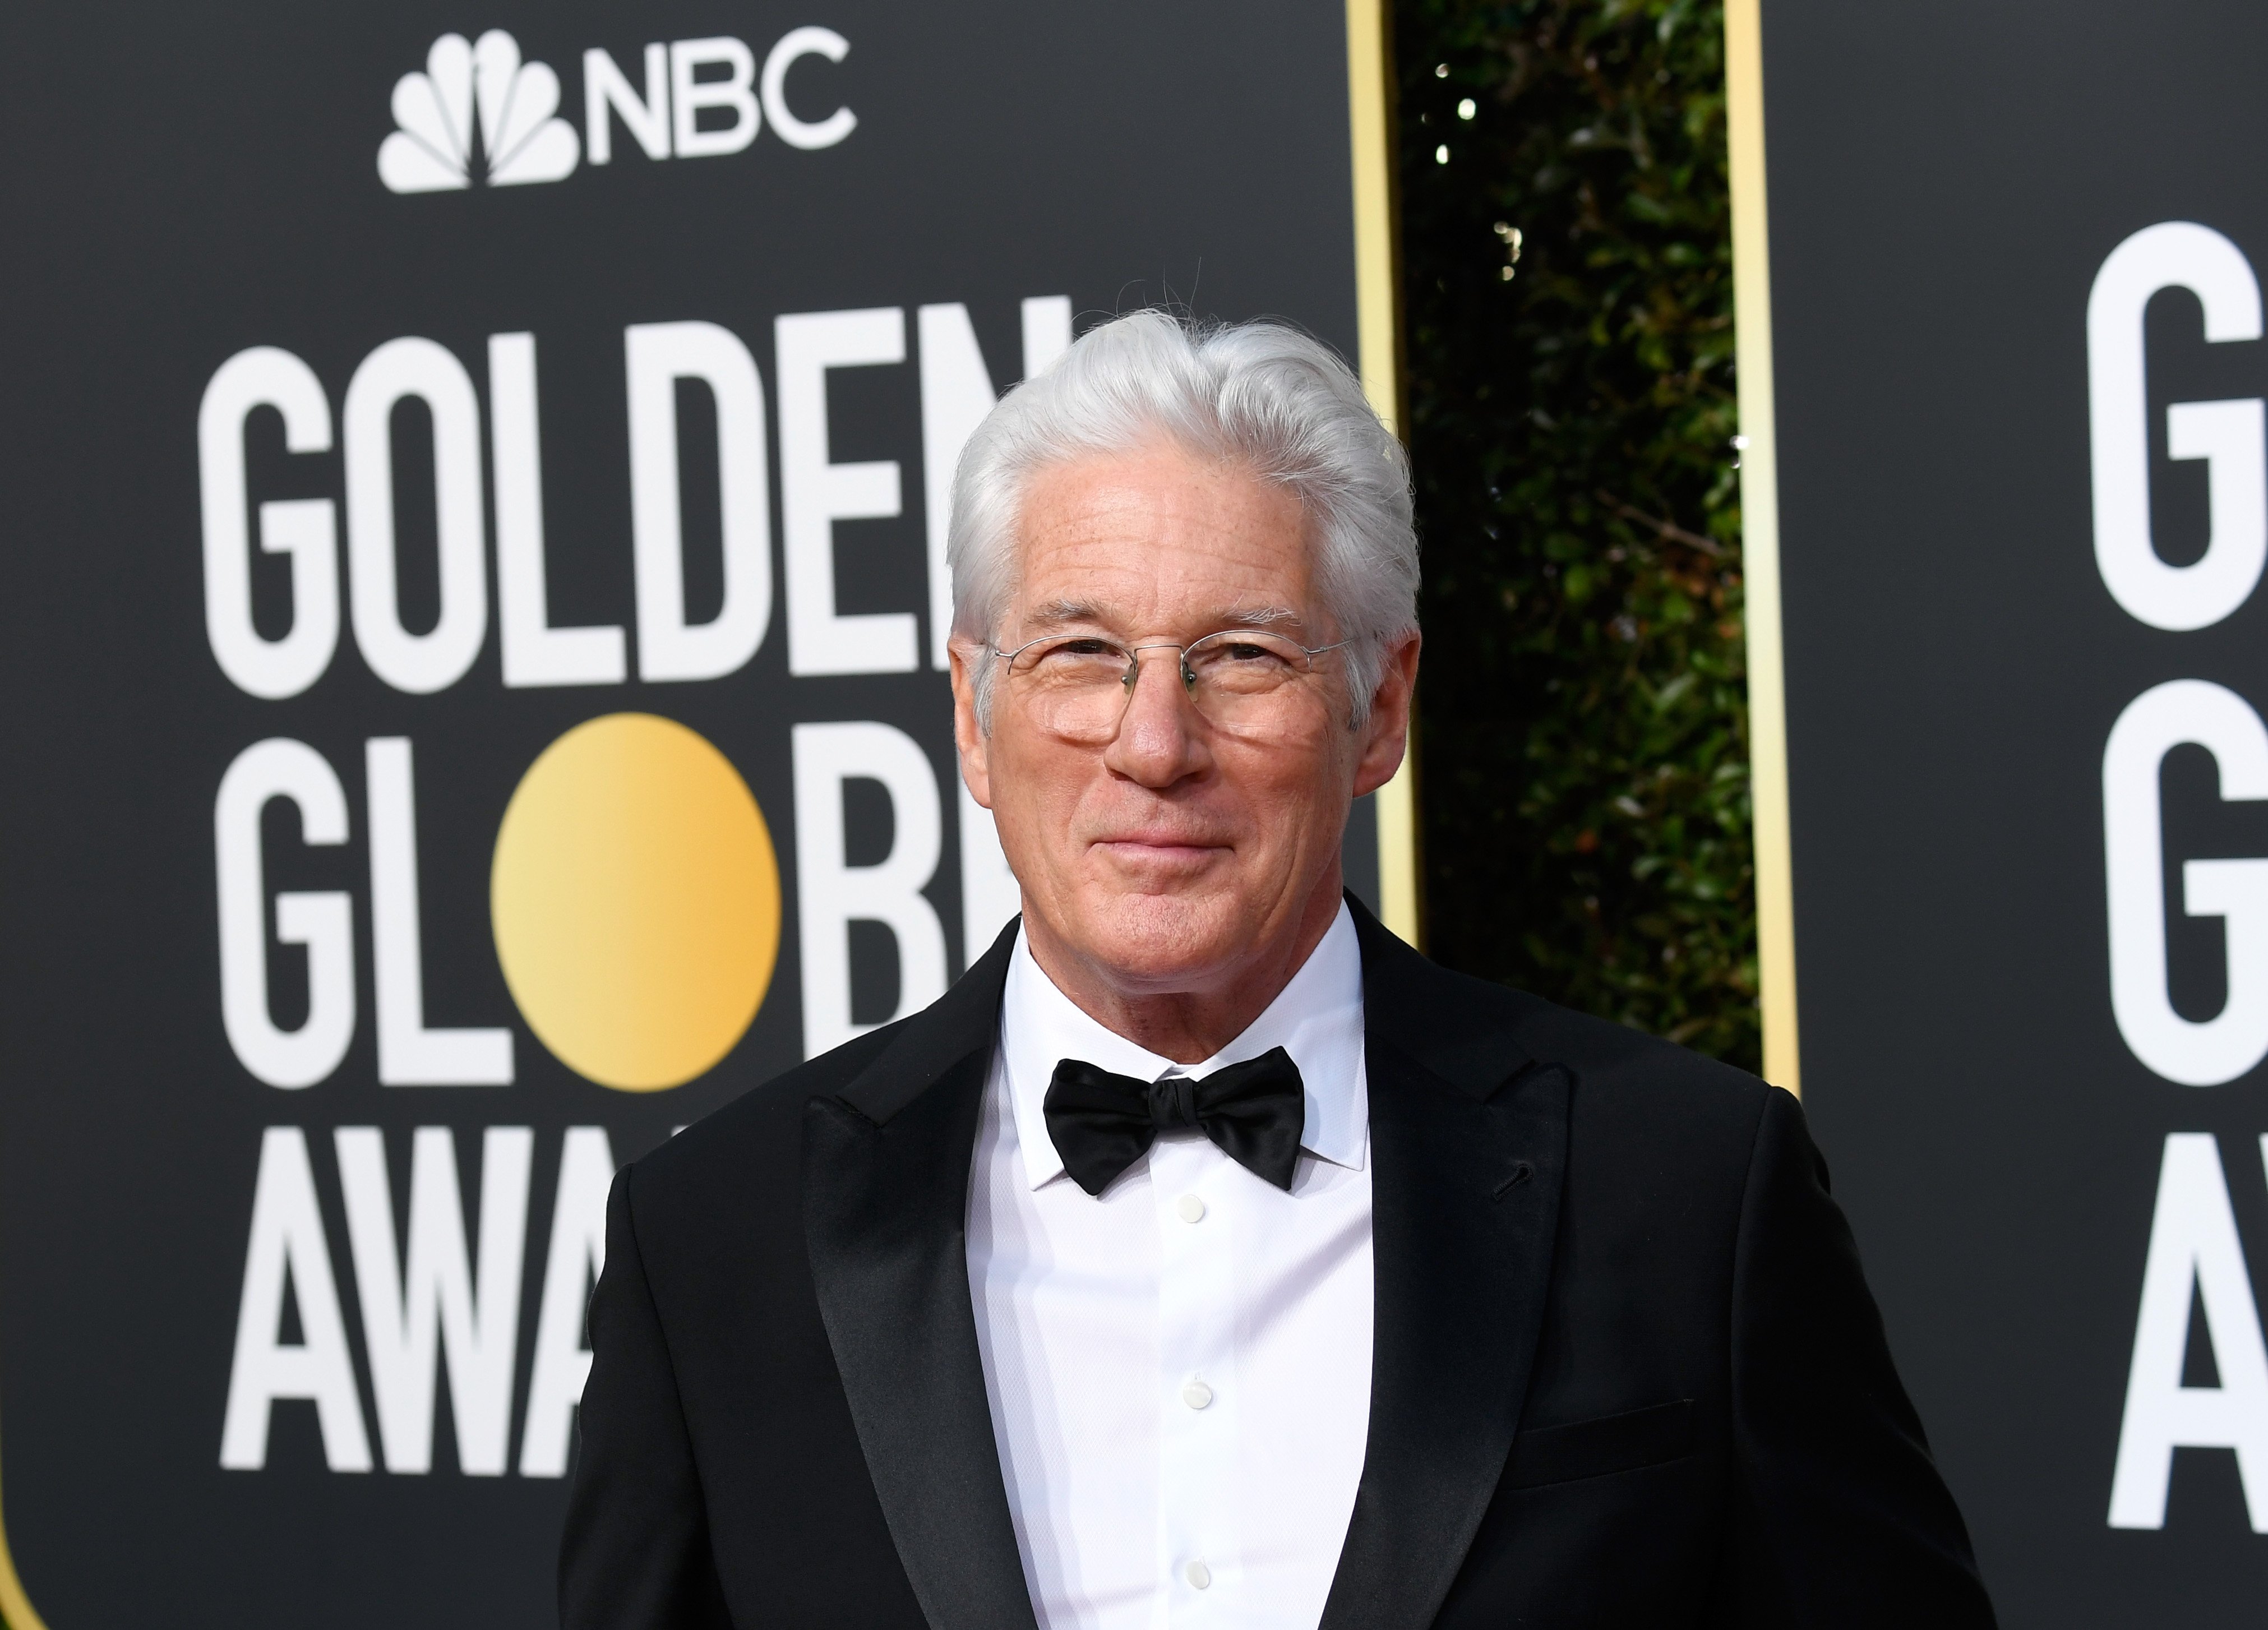 Richard Gere at the 76th Annual Golden Globe Awards at The Beverly Hilton Hotel on January 6, 2019  | Photo: Getty Images